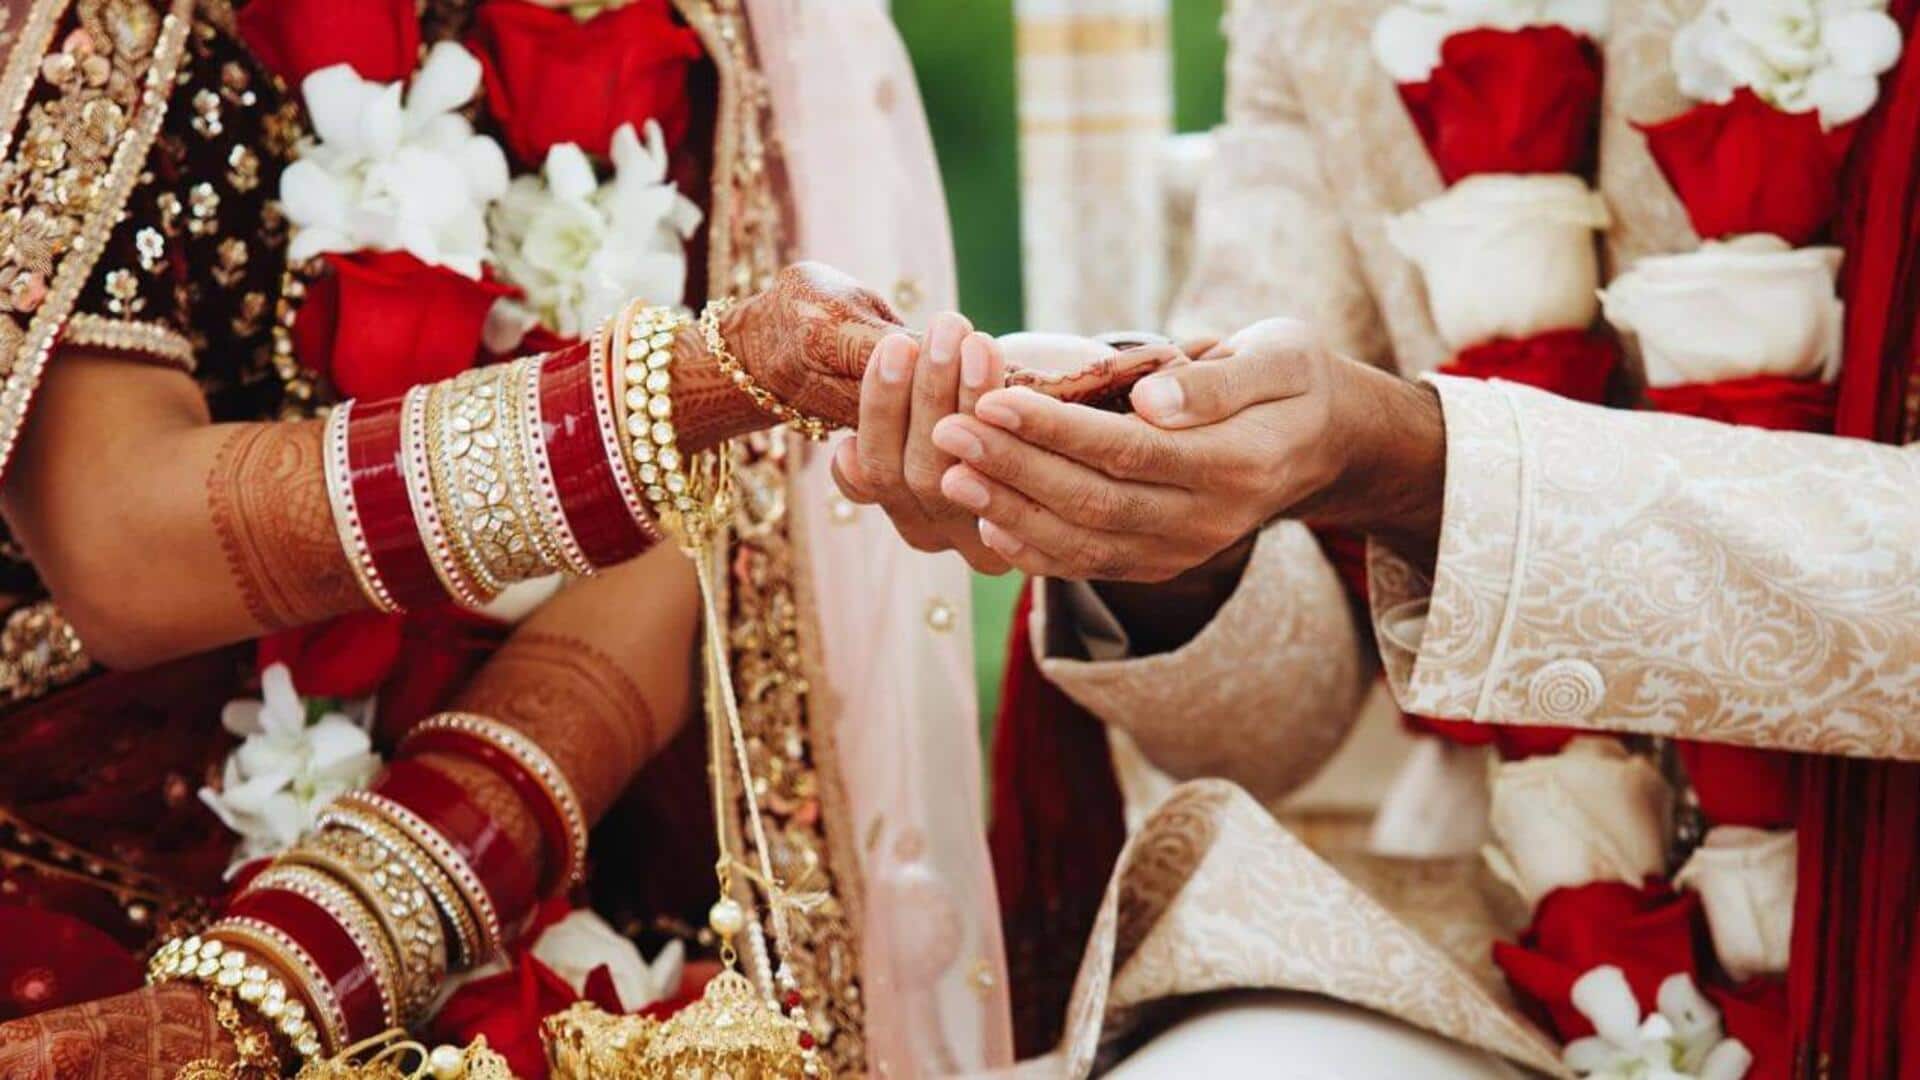 India eyes Rs. 4.25L crore business from weddings in 2023 